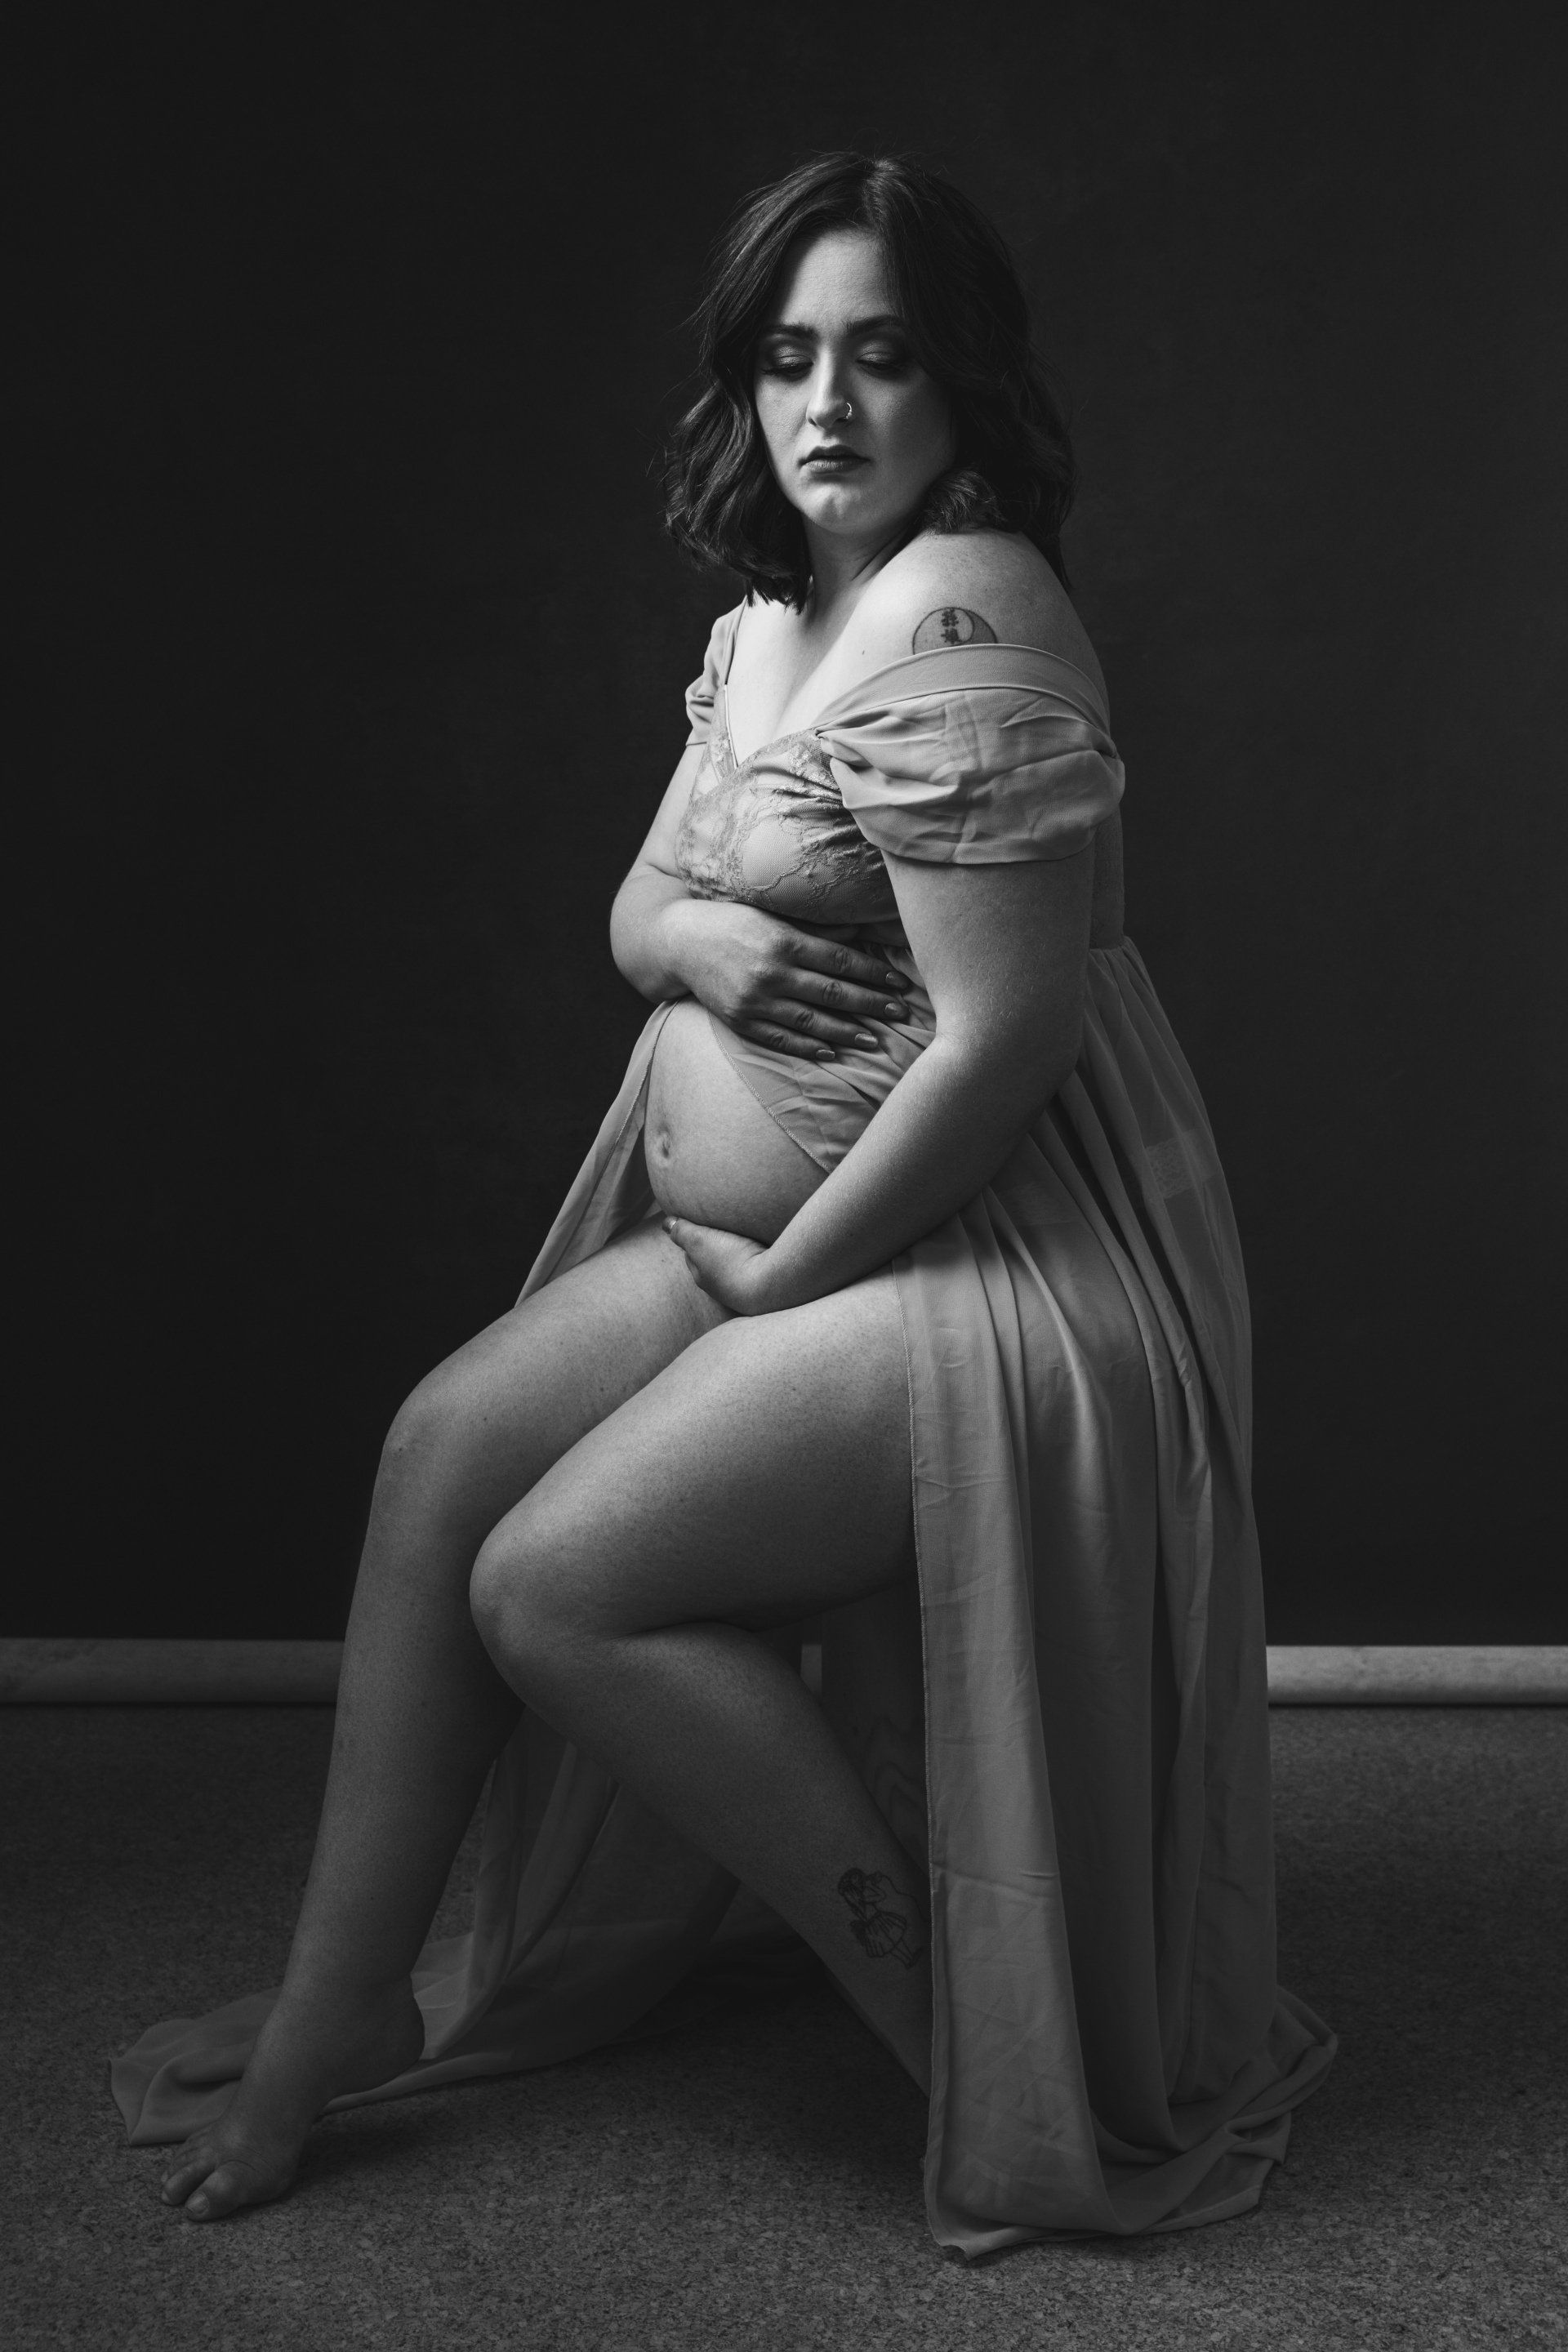 A woman in a dress, pregnant, sitting on the chair